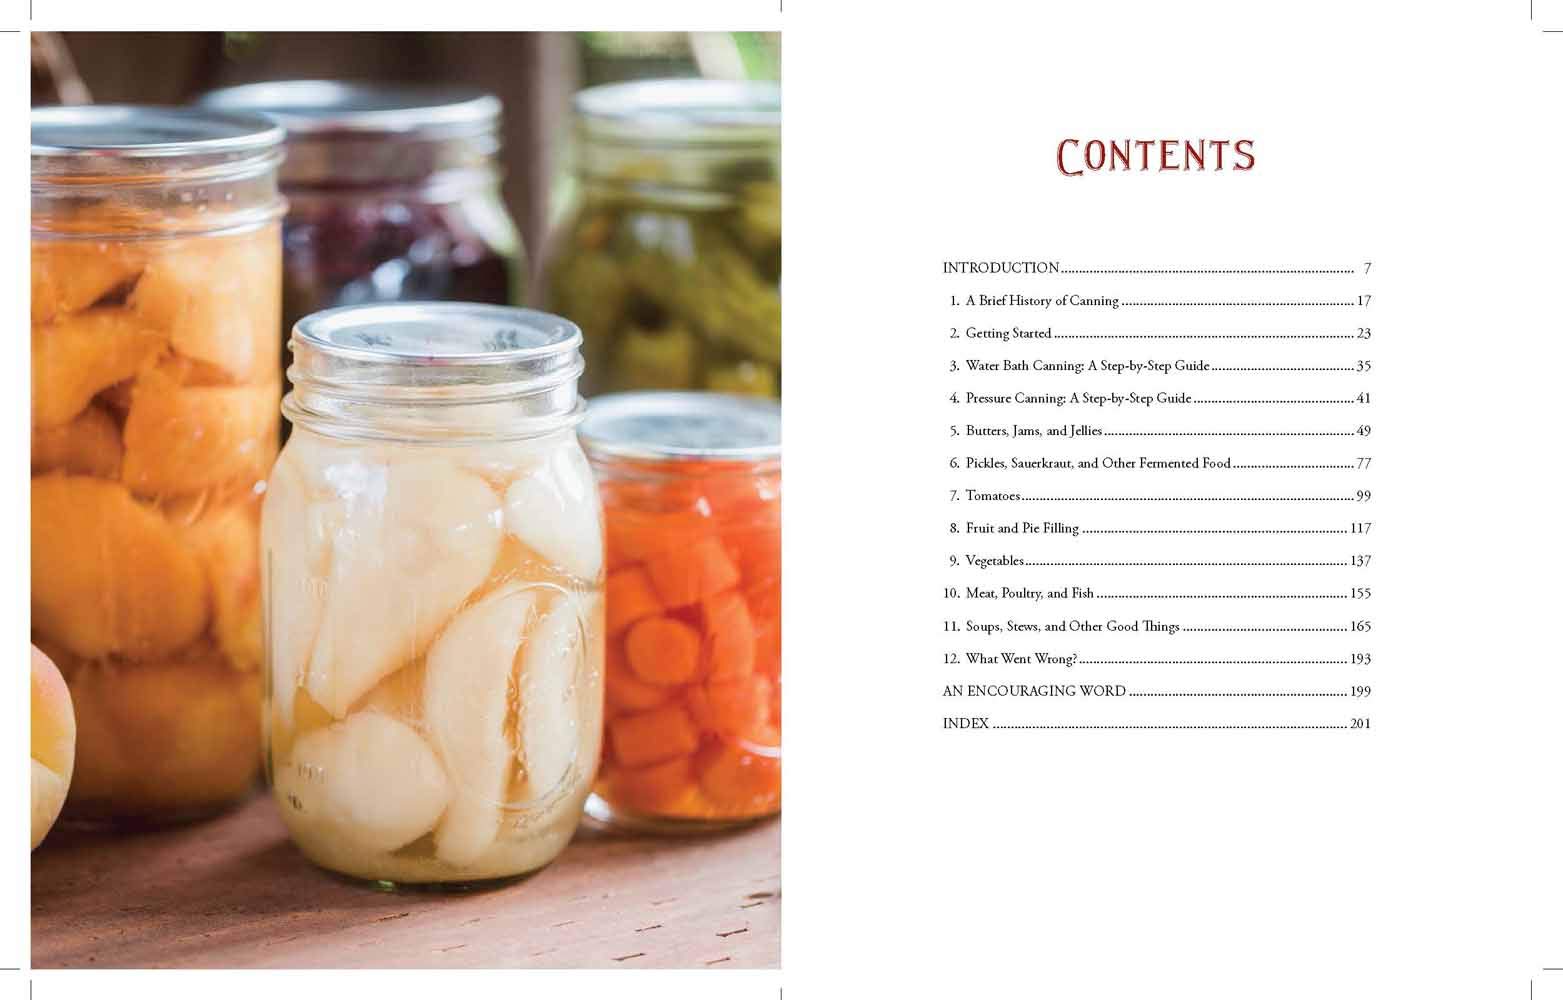 The Homestead Canning Cookbook: •Simple, Safe Instructions from a Certified Master Food Preserver •Over 150 Delicious, Homemade Recipes •Practical ... Lifestyle (The Homestead Essentials)